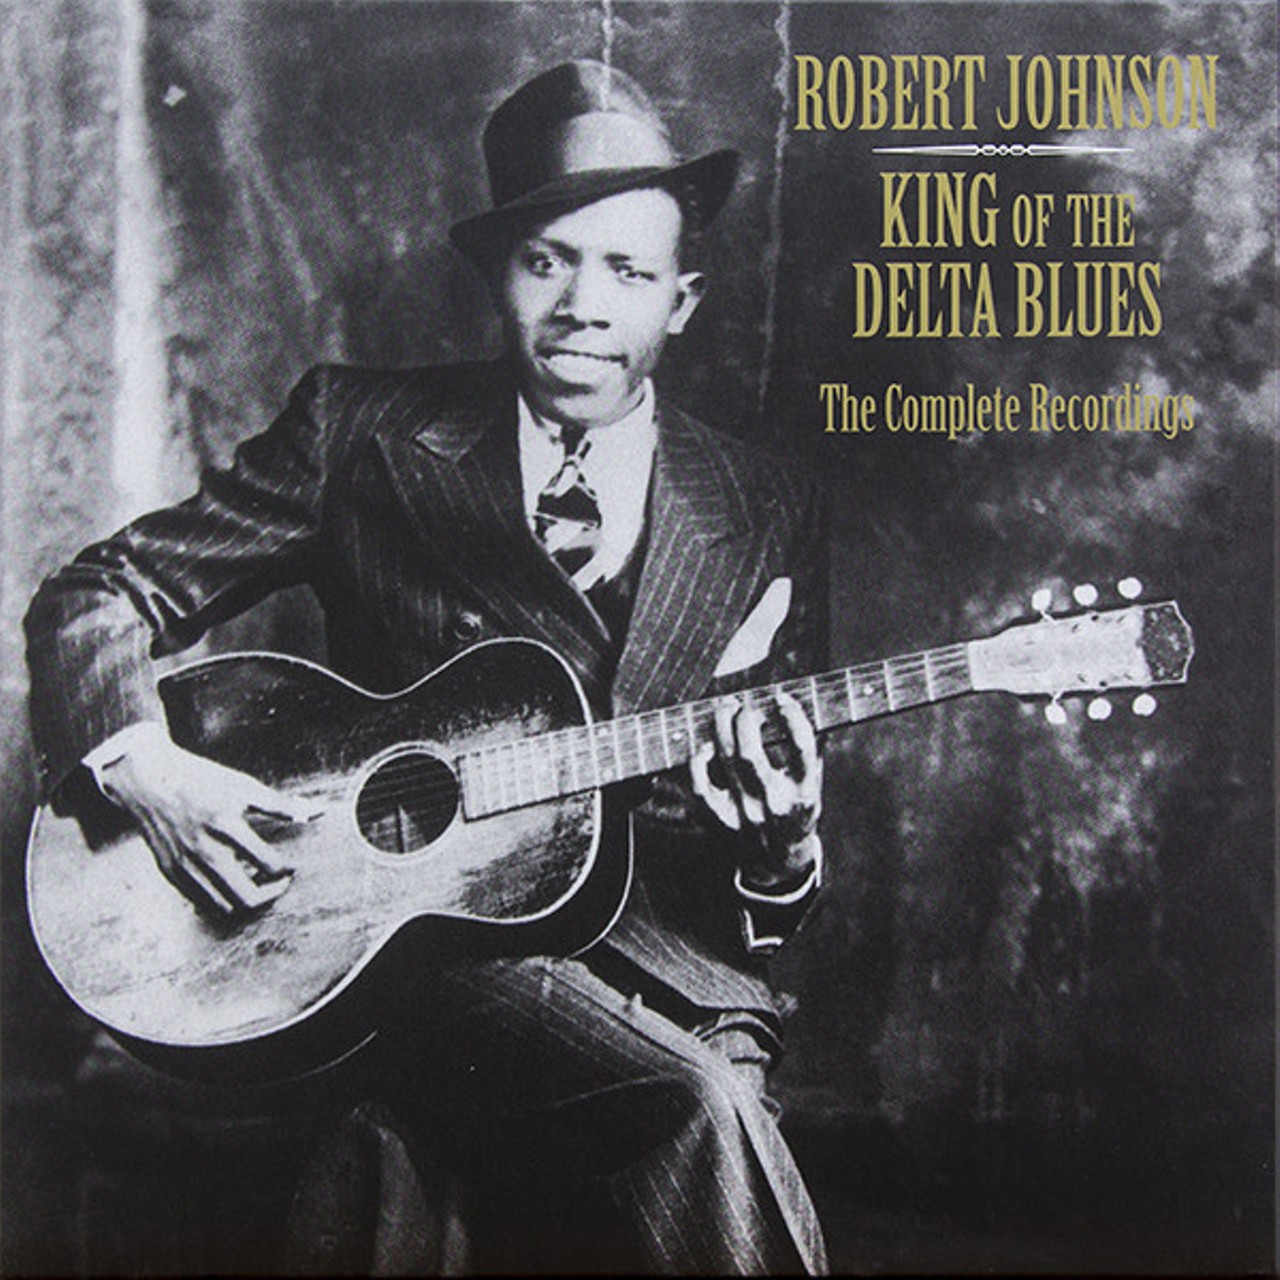 Robert Johnson: "King of the Delta Blues"
In 1936, legendary bluesman Robert Johnson recorded in Room 414 of San Antonio's Gunter Hotel, setting a new template for the genre and laying the foundation for rock 'n' roll. You simply cannot call yourself a blues fan unless you've heard these seminal recordings.
Photo via Not Now UK